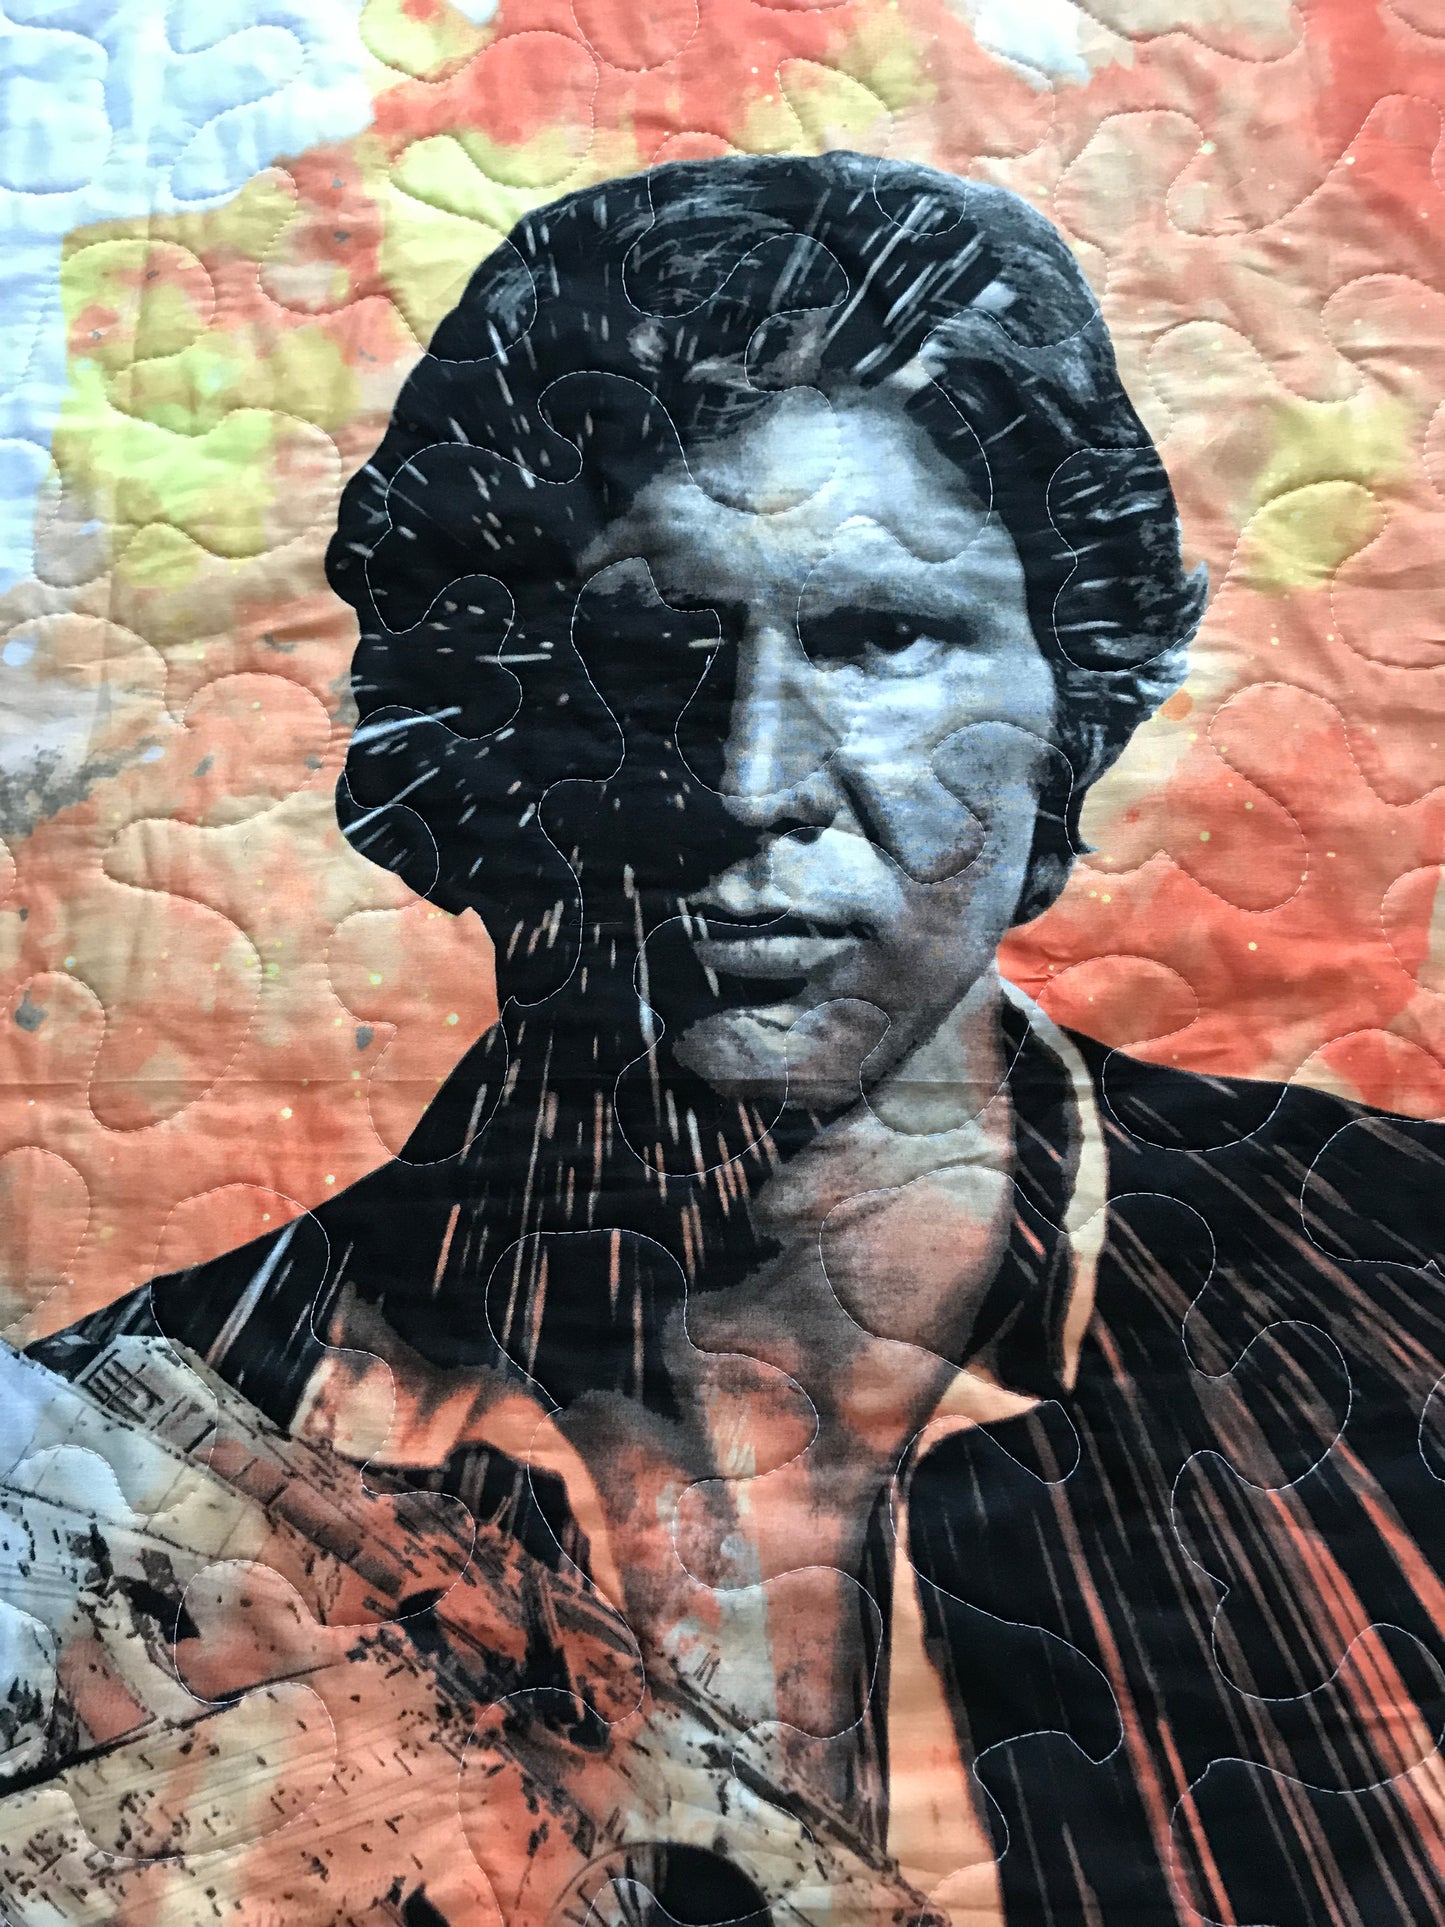 STAR WARS HAN SOLO INSPIRED QUILTED BLANKET